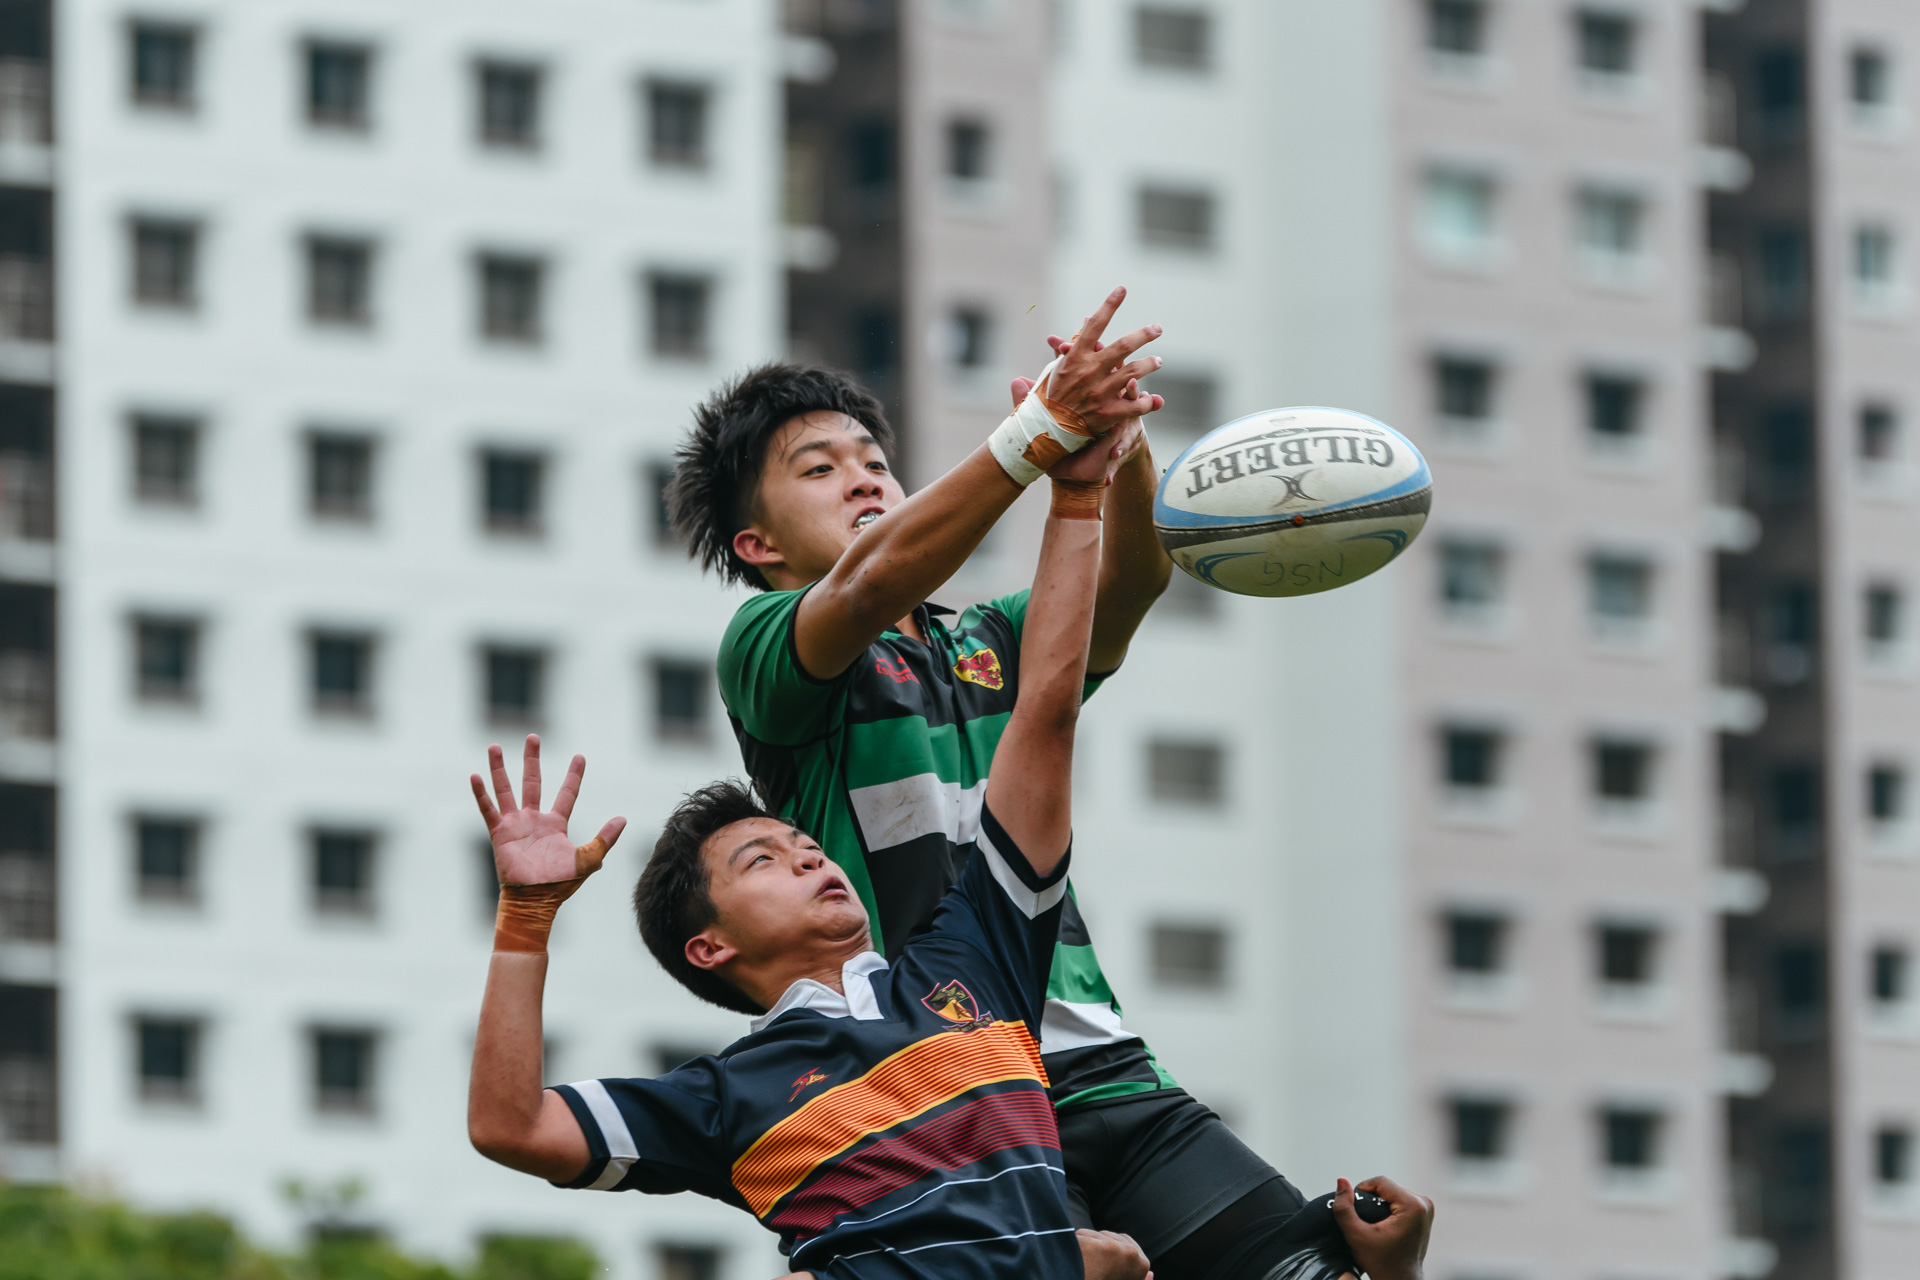 ACJC’s Ethan Koh (#20) competes fiercely at the lineout with RI’s Ryan Tan (#5). (Photo 2 © Joash Chow/Red Sports)